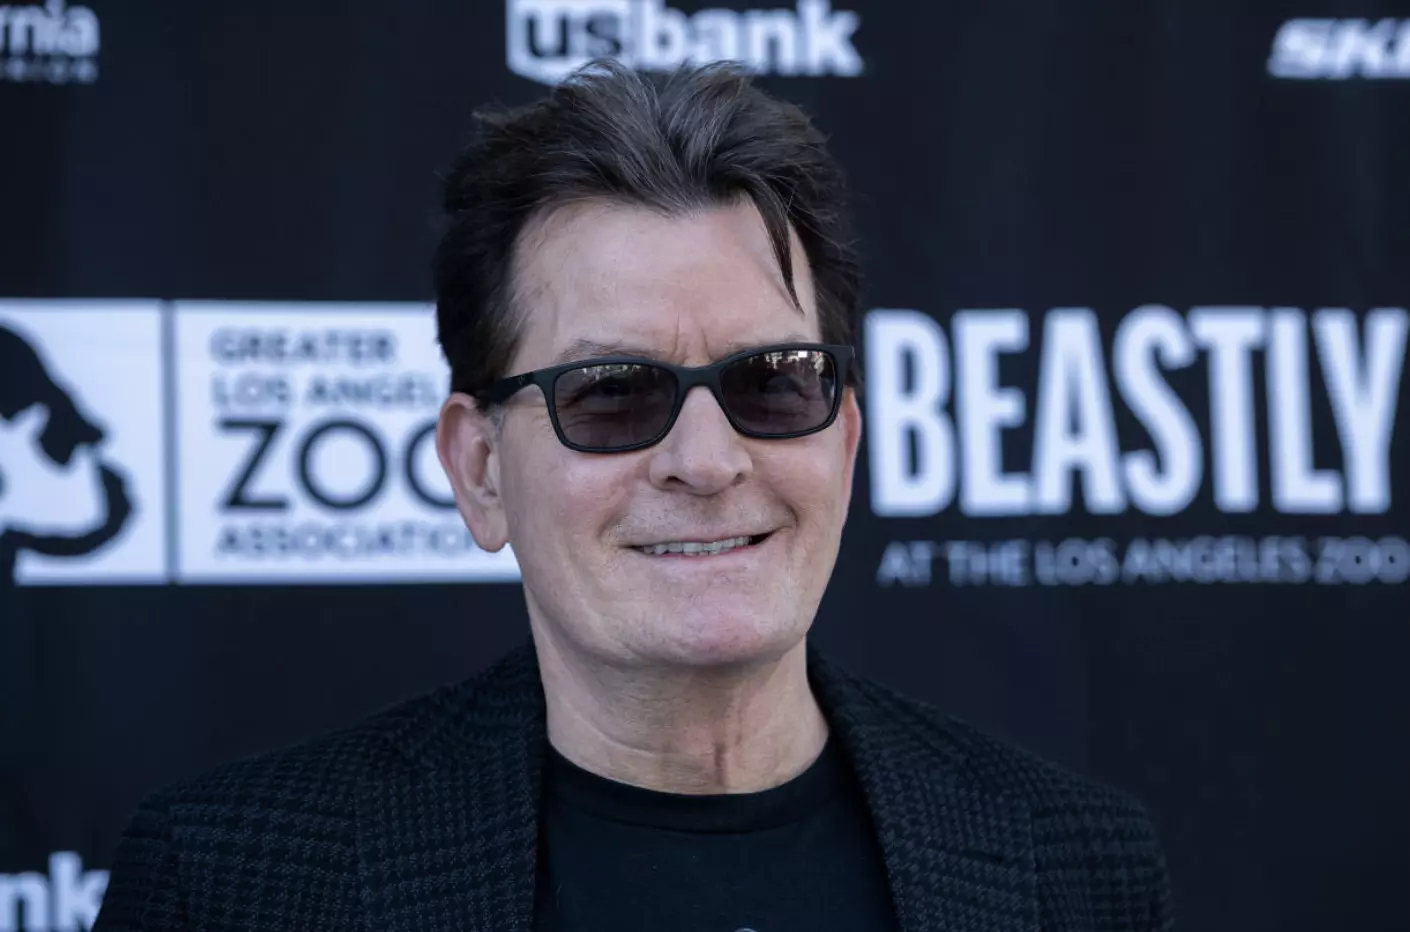 American actor Charlie Sheen attacked, survives strangulation attempt at his Malibu home